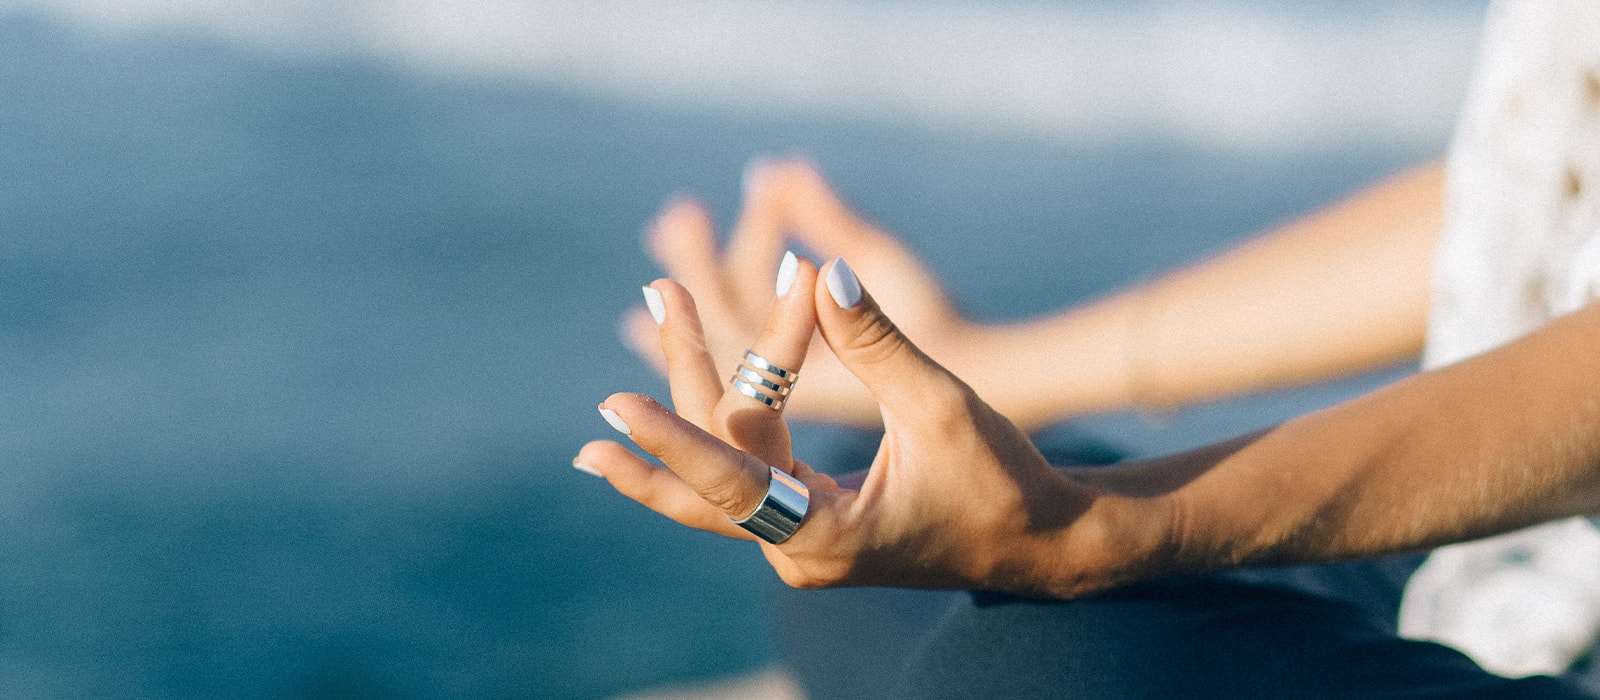 Reconnect through Mindfulness by Heather Oakman